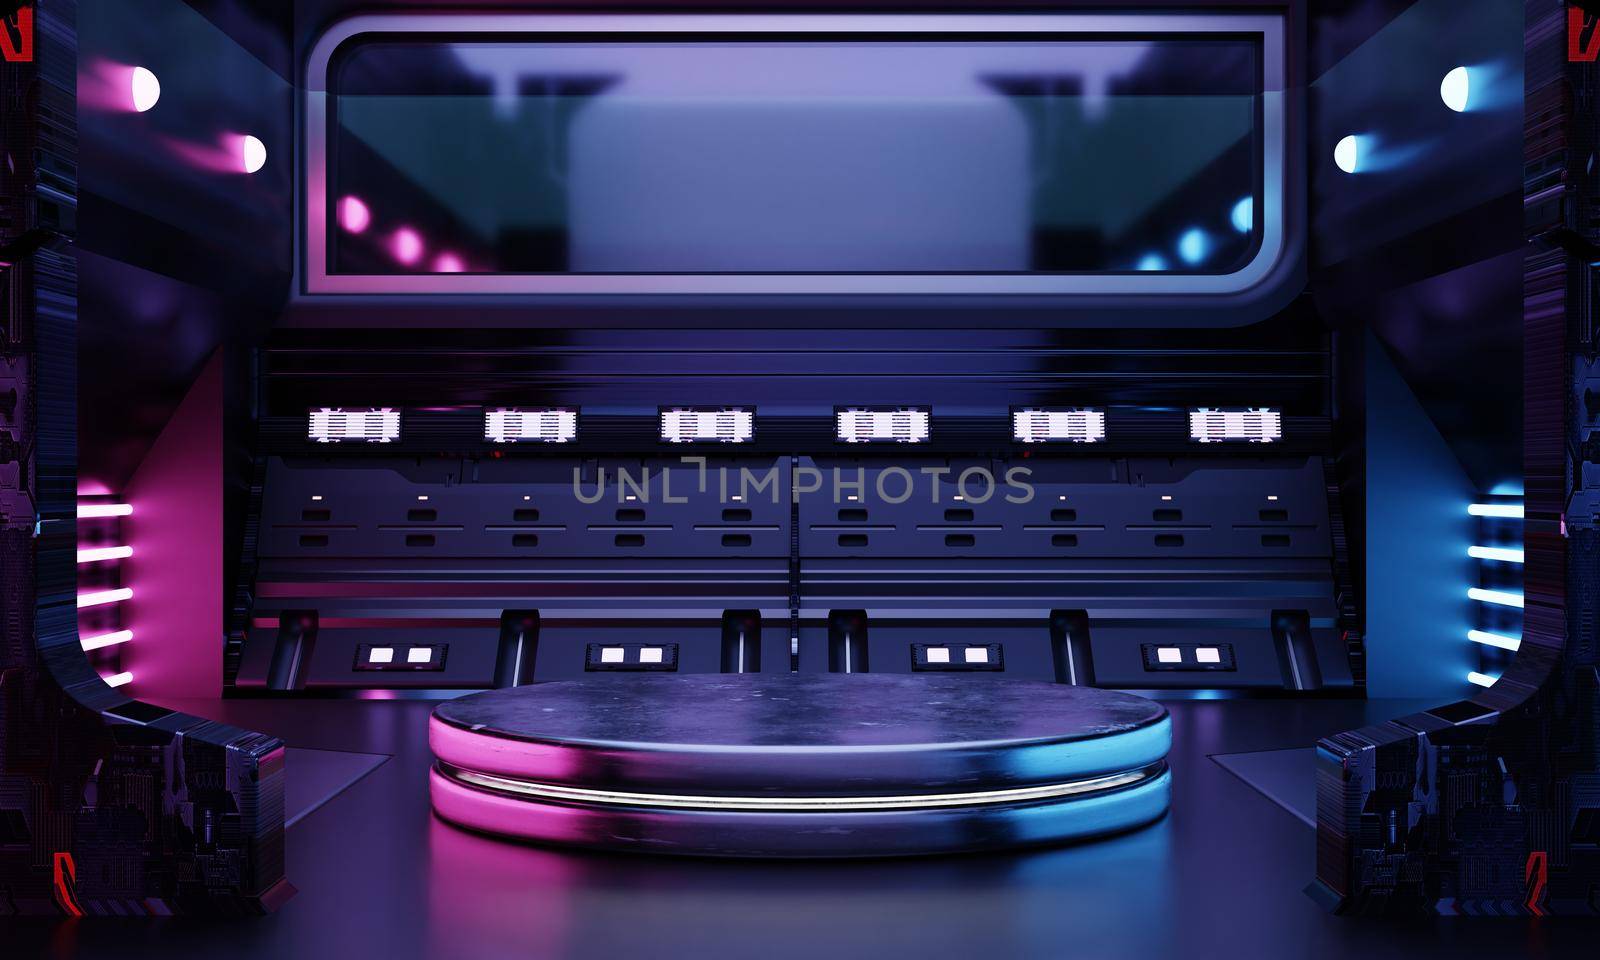 Cyberpunk sci-fi product podium showcase in empty spaceship room with blue and pink background. Cosmos space technology and entertainment object concept. 3D illustration rendering